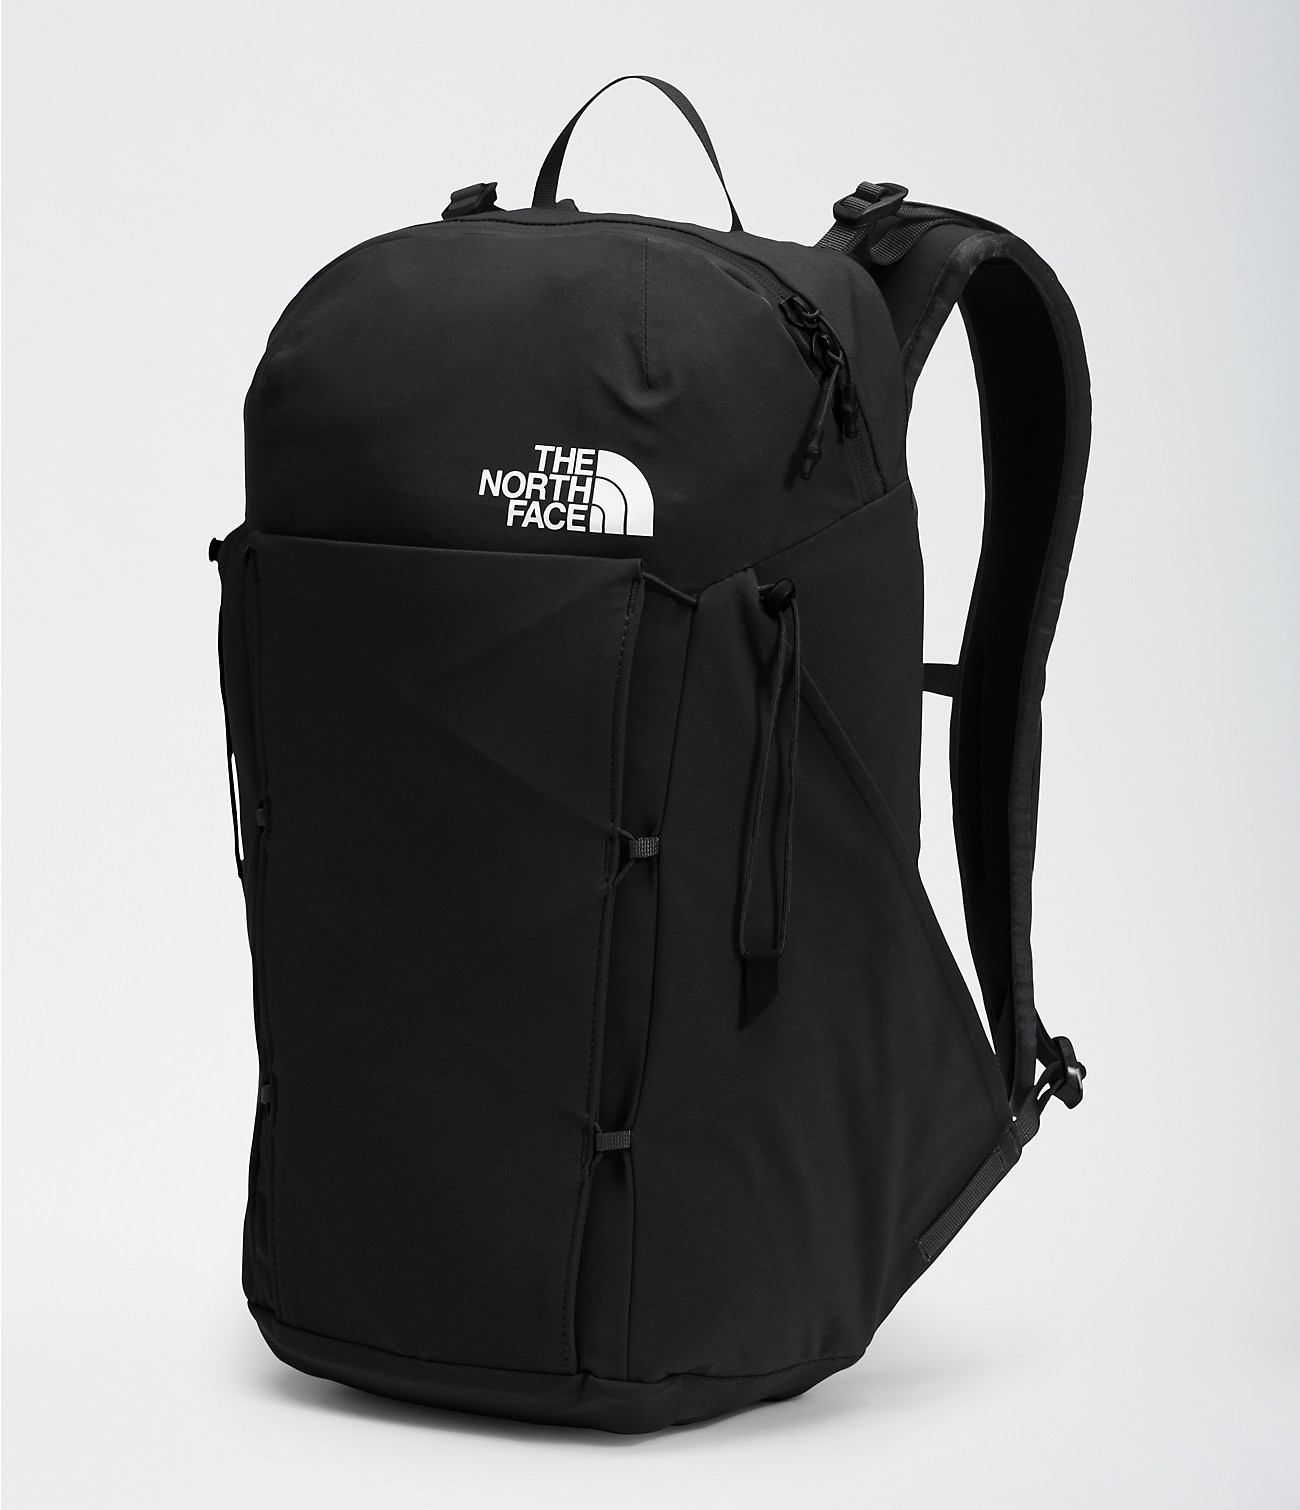 Advant 20 Backpack | The North Face